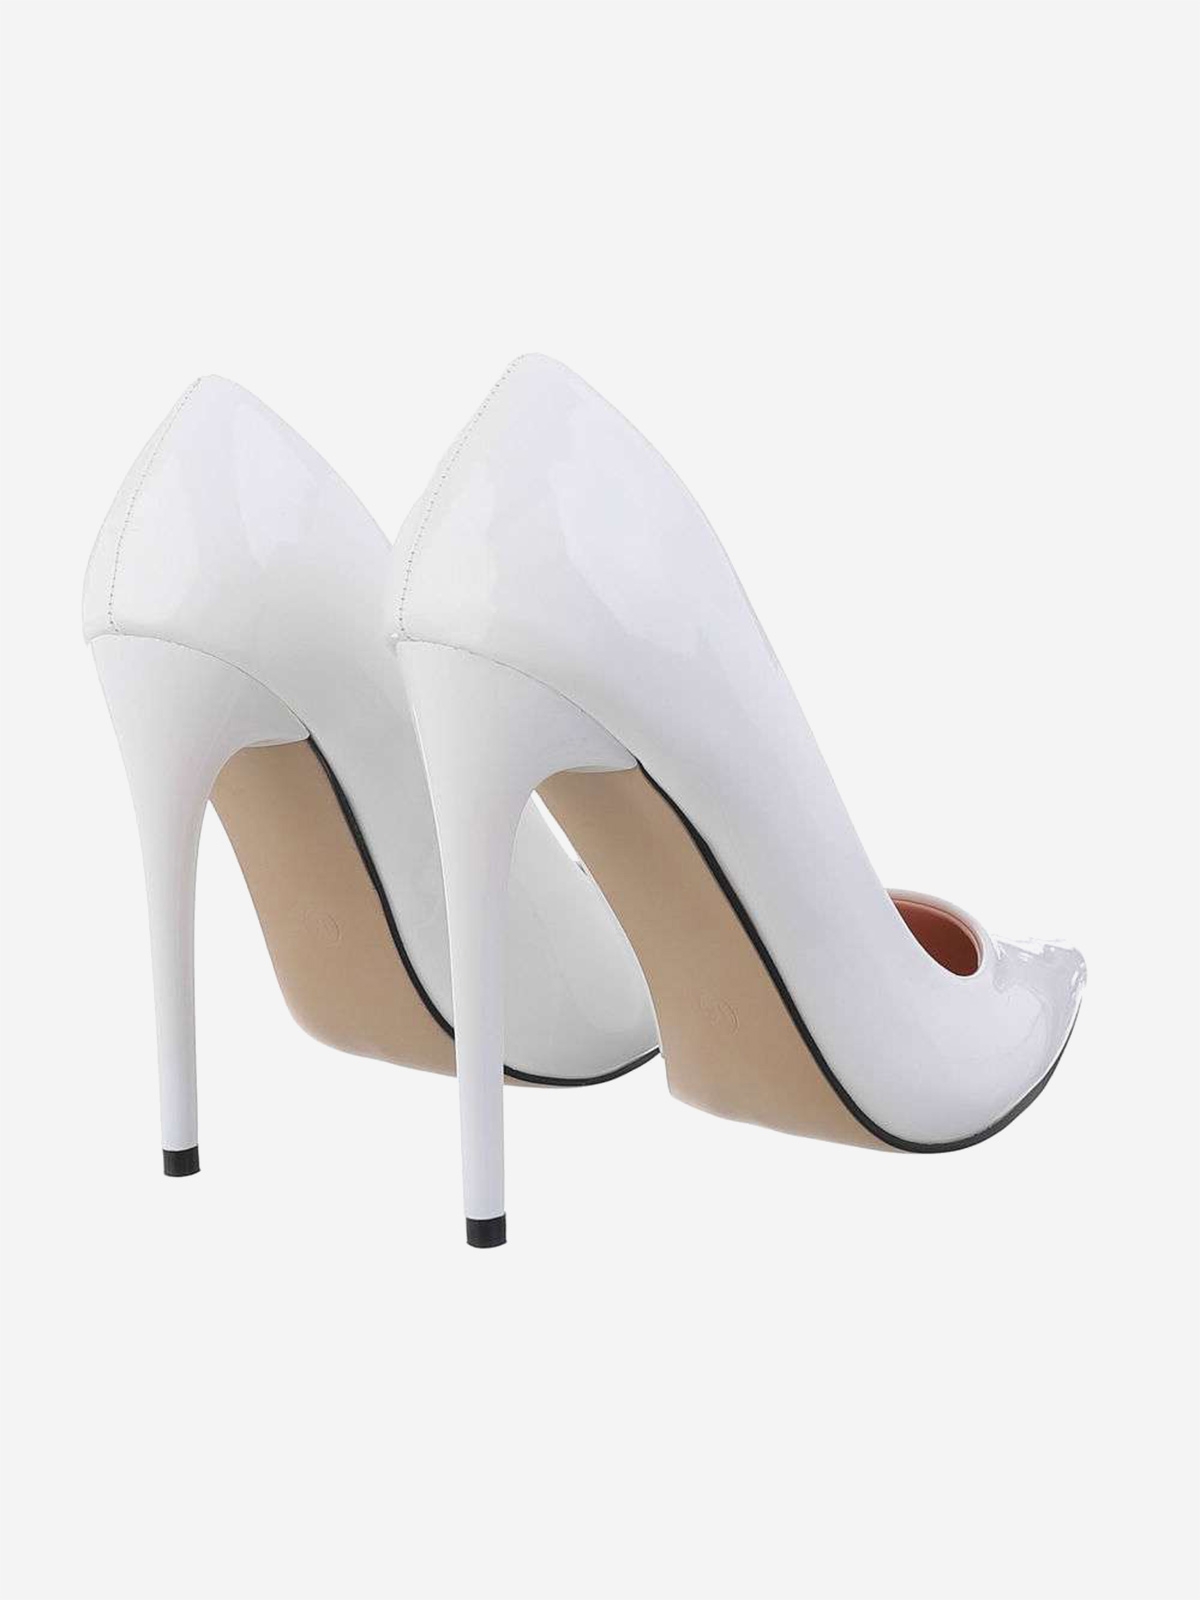 Women's high-heeled shoes in white